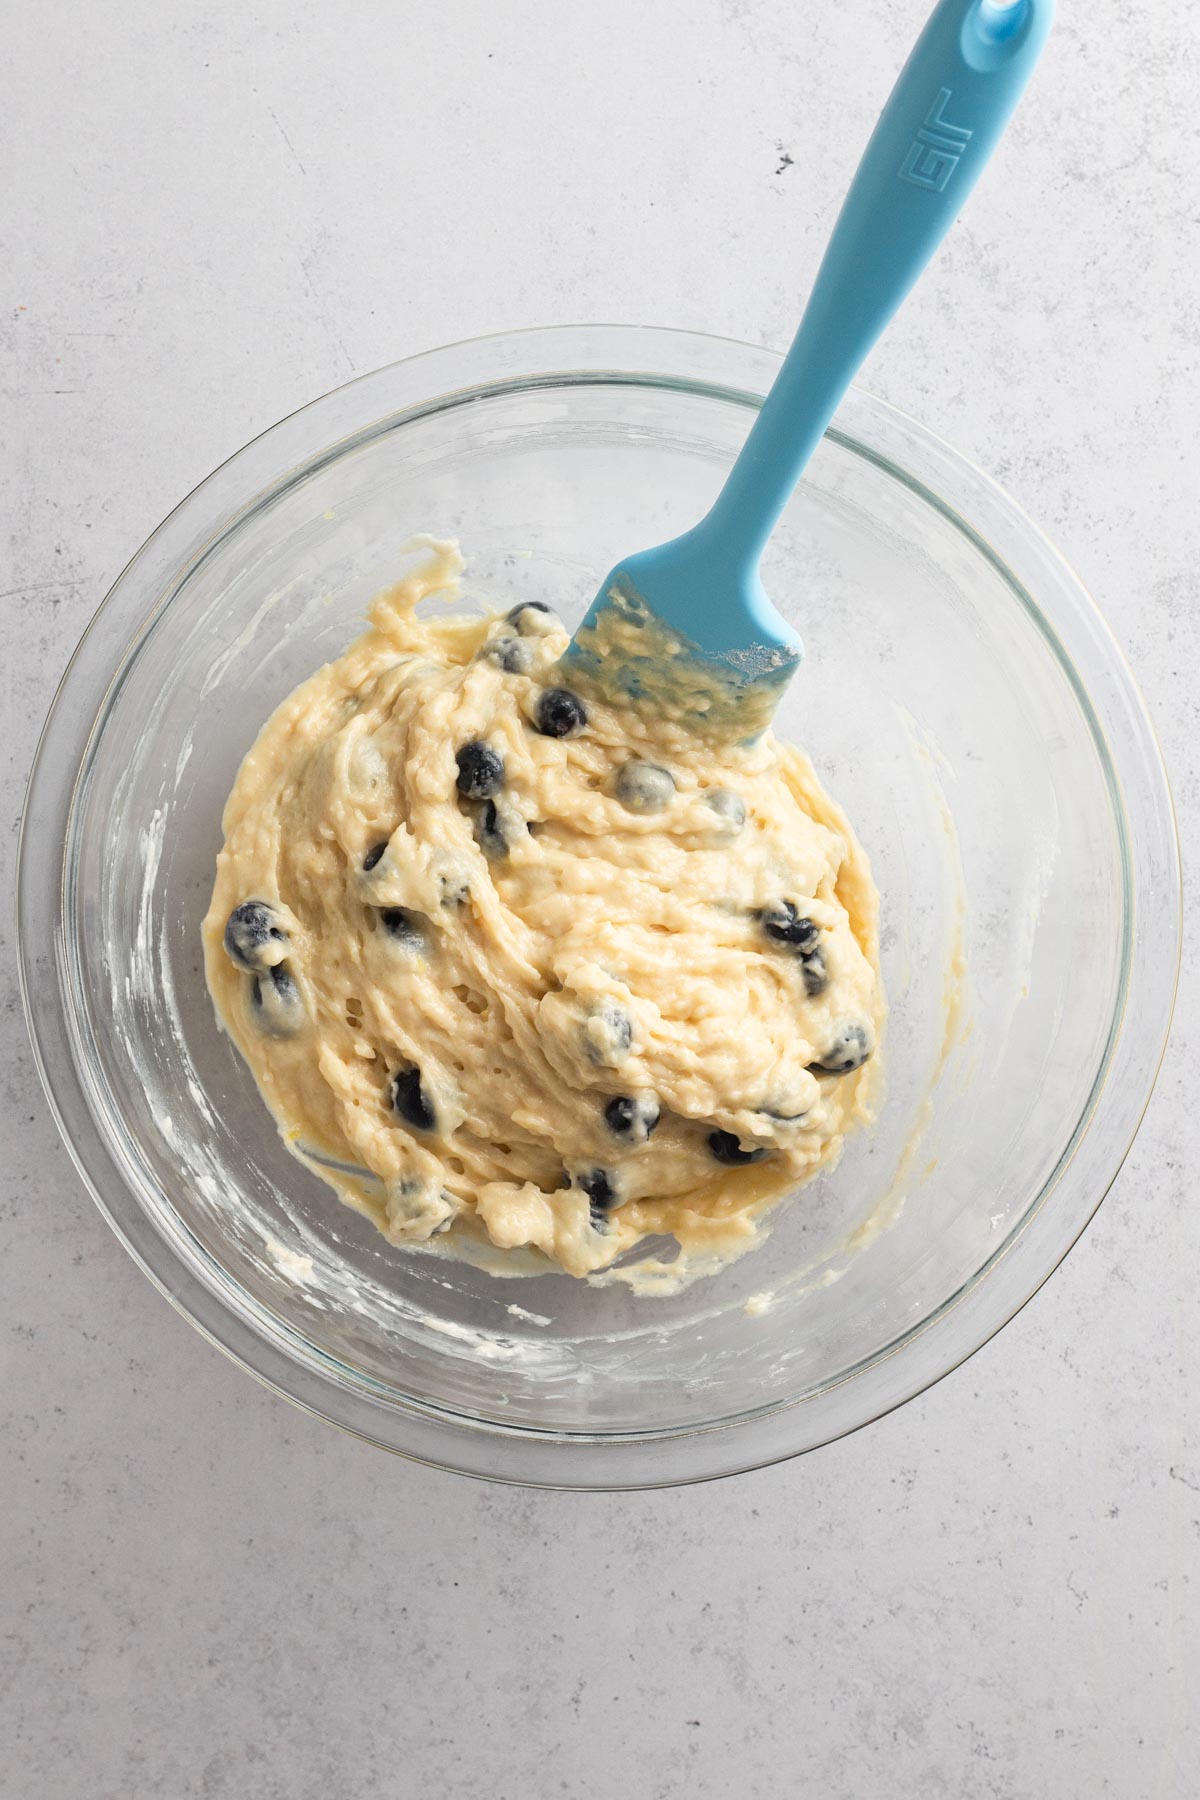 Muffin batter with blueberries in a glass bowl.